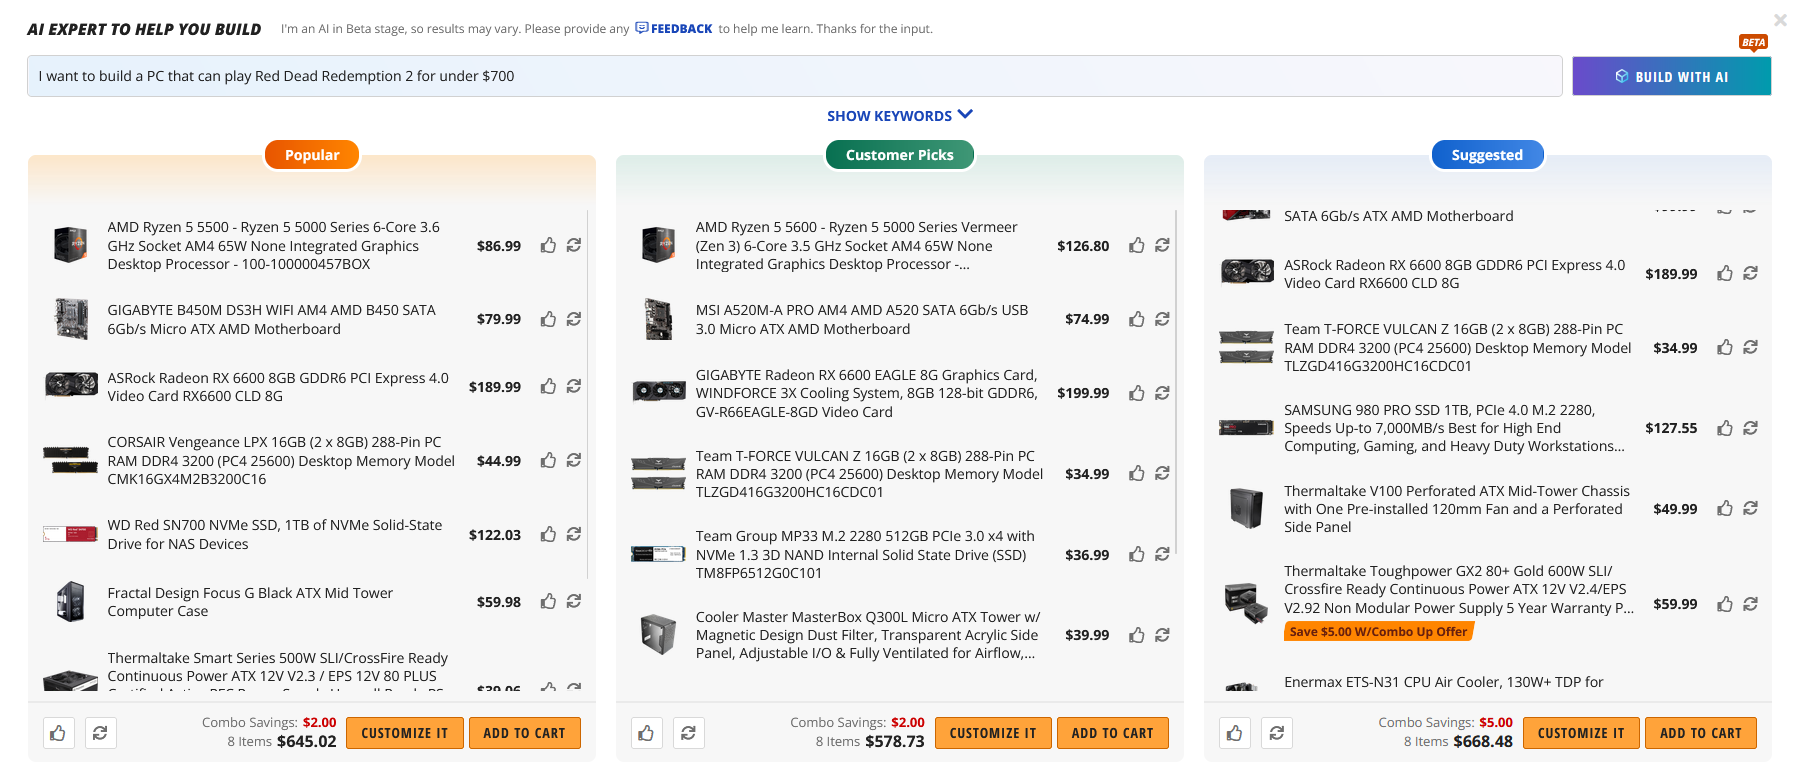 The results of a query to NewEgg's AI-powered custom PC builder.